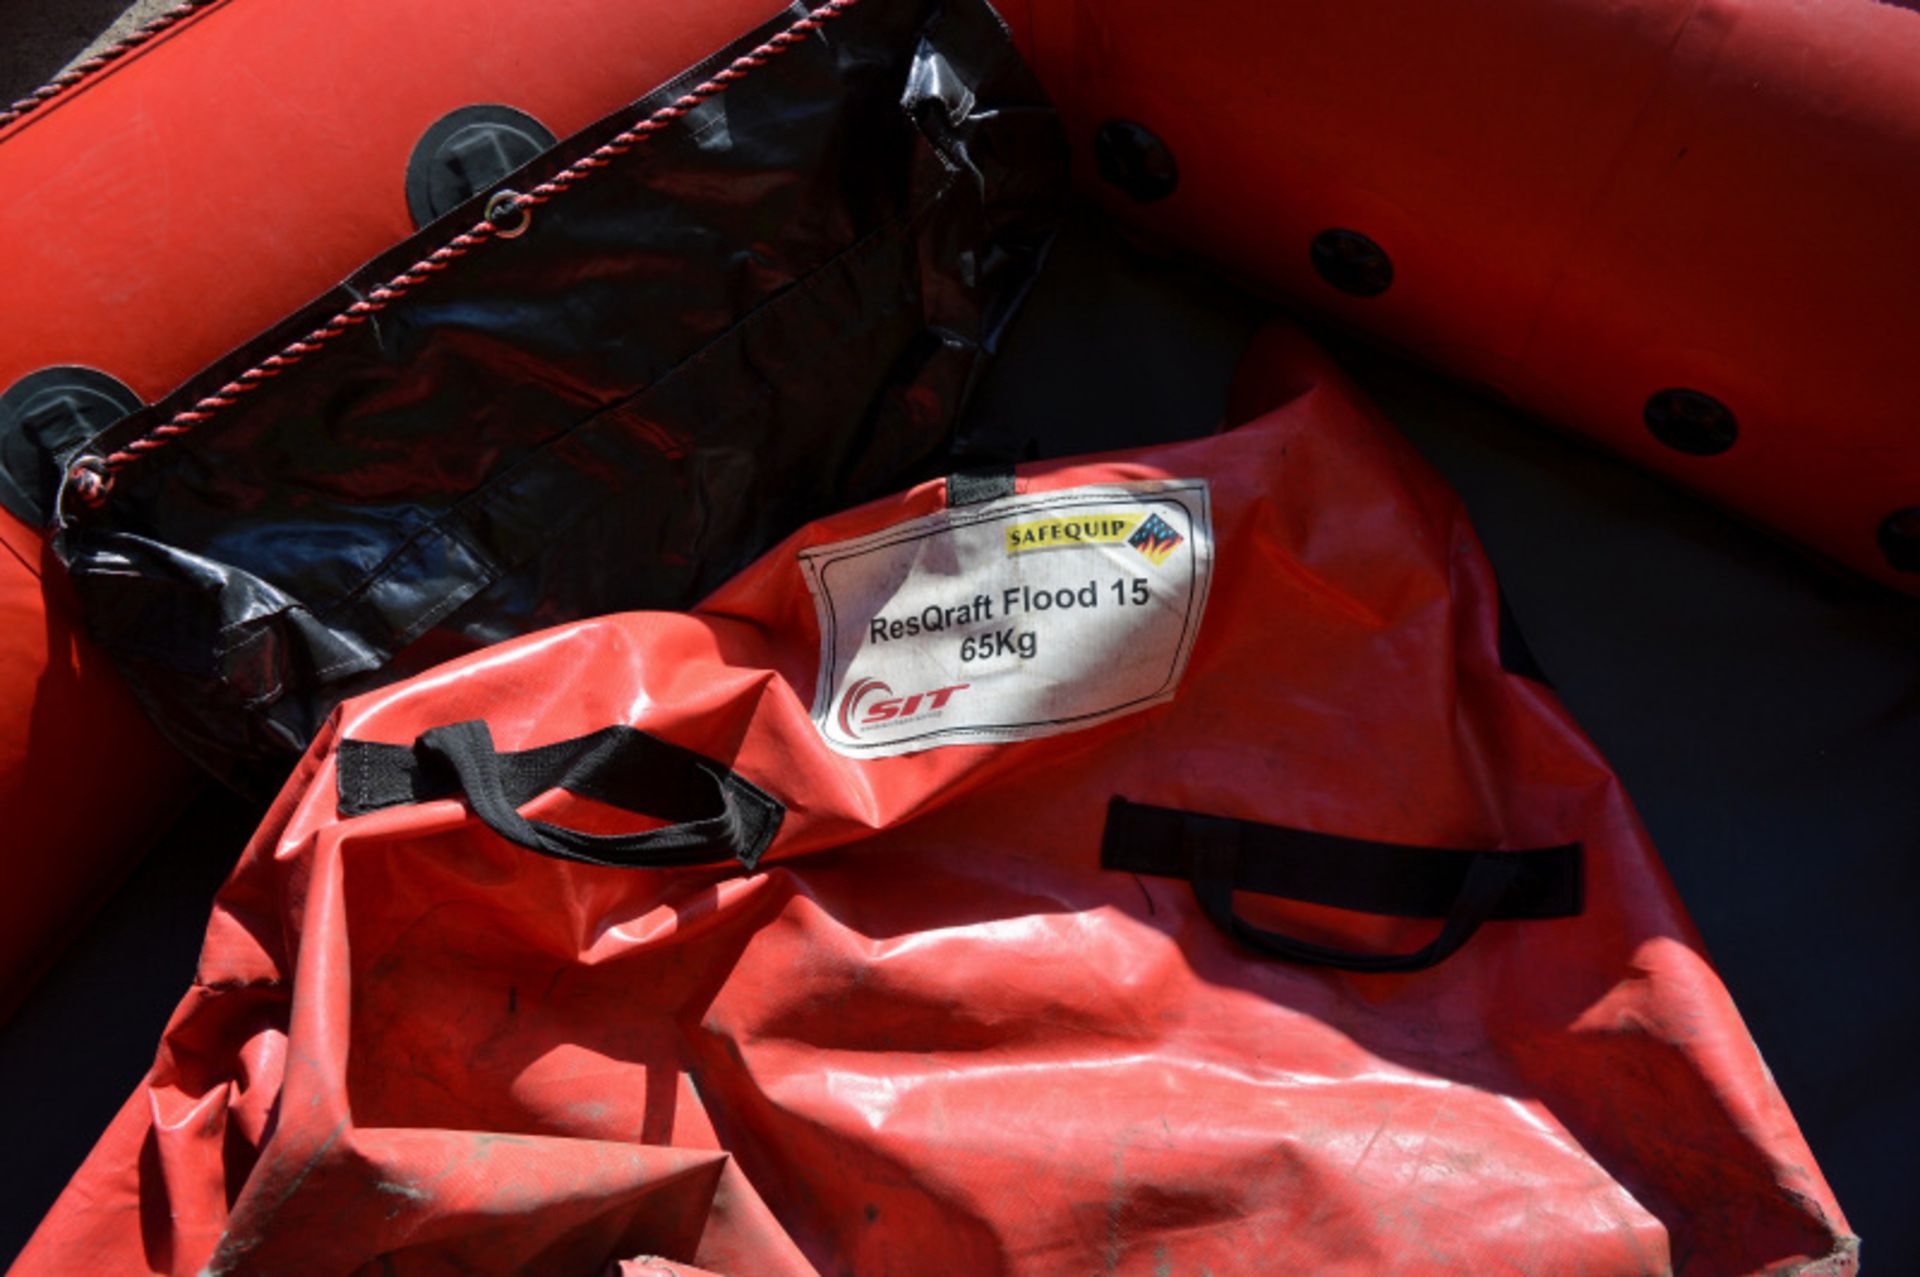 SIT Safequip ReqQraft Flood 15 inflatable boat - Image 10 of 11